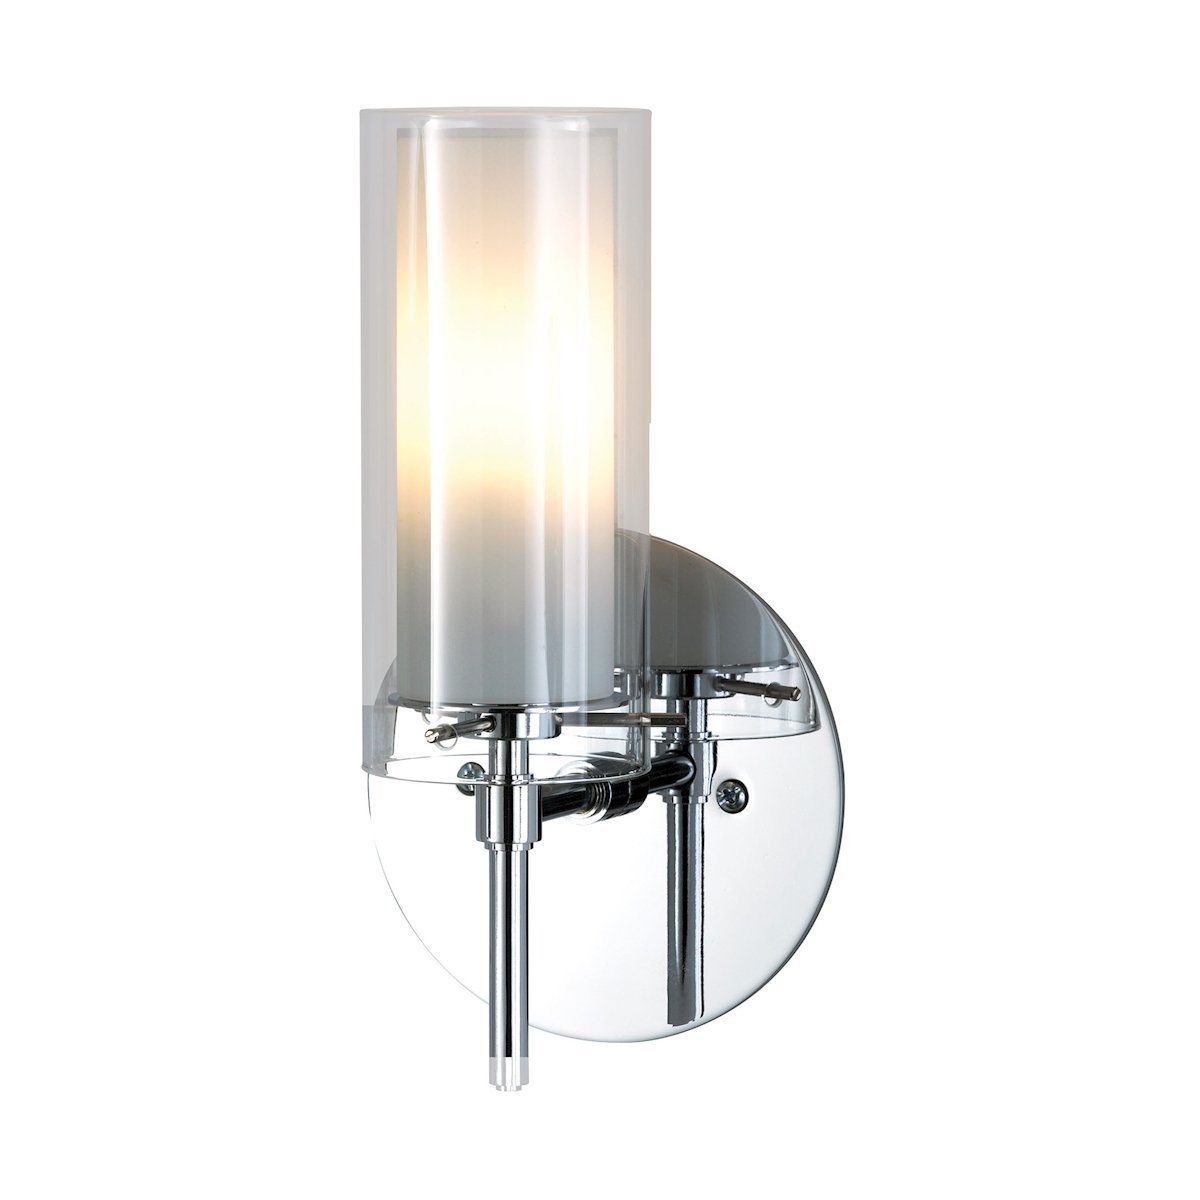 Tubolaire 1 Light Sconce In Chrome With Clear Outer Glass And Frosted Interior Glass Wall Sconce Elk Lighting 